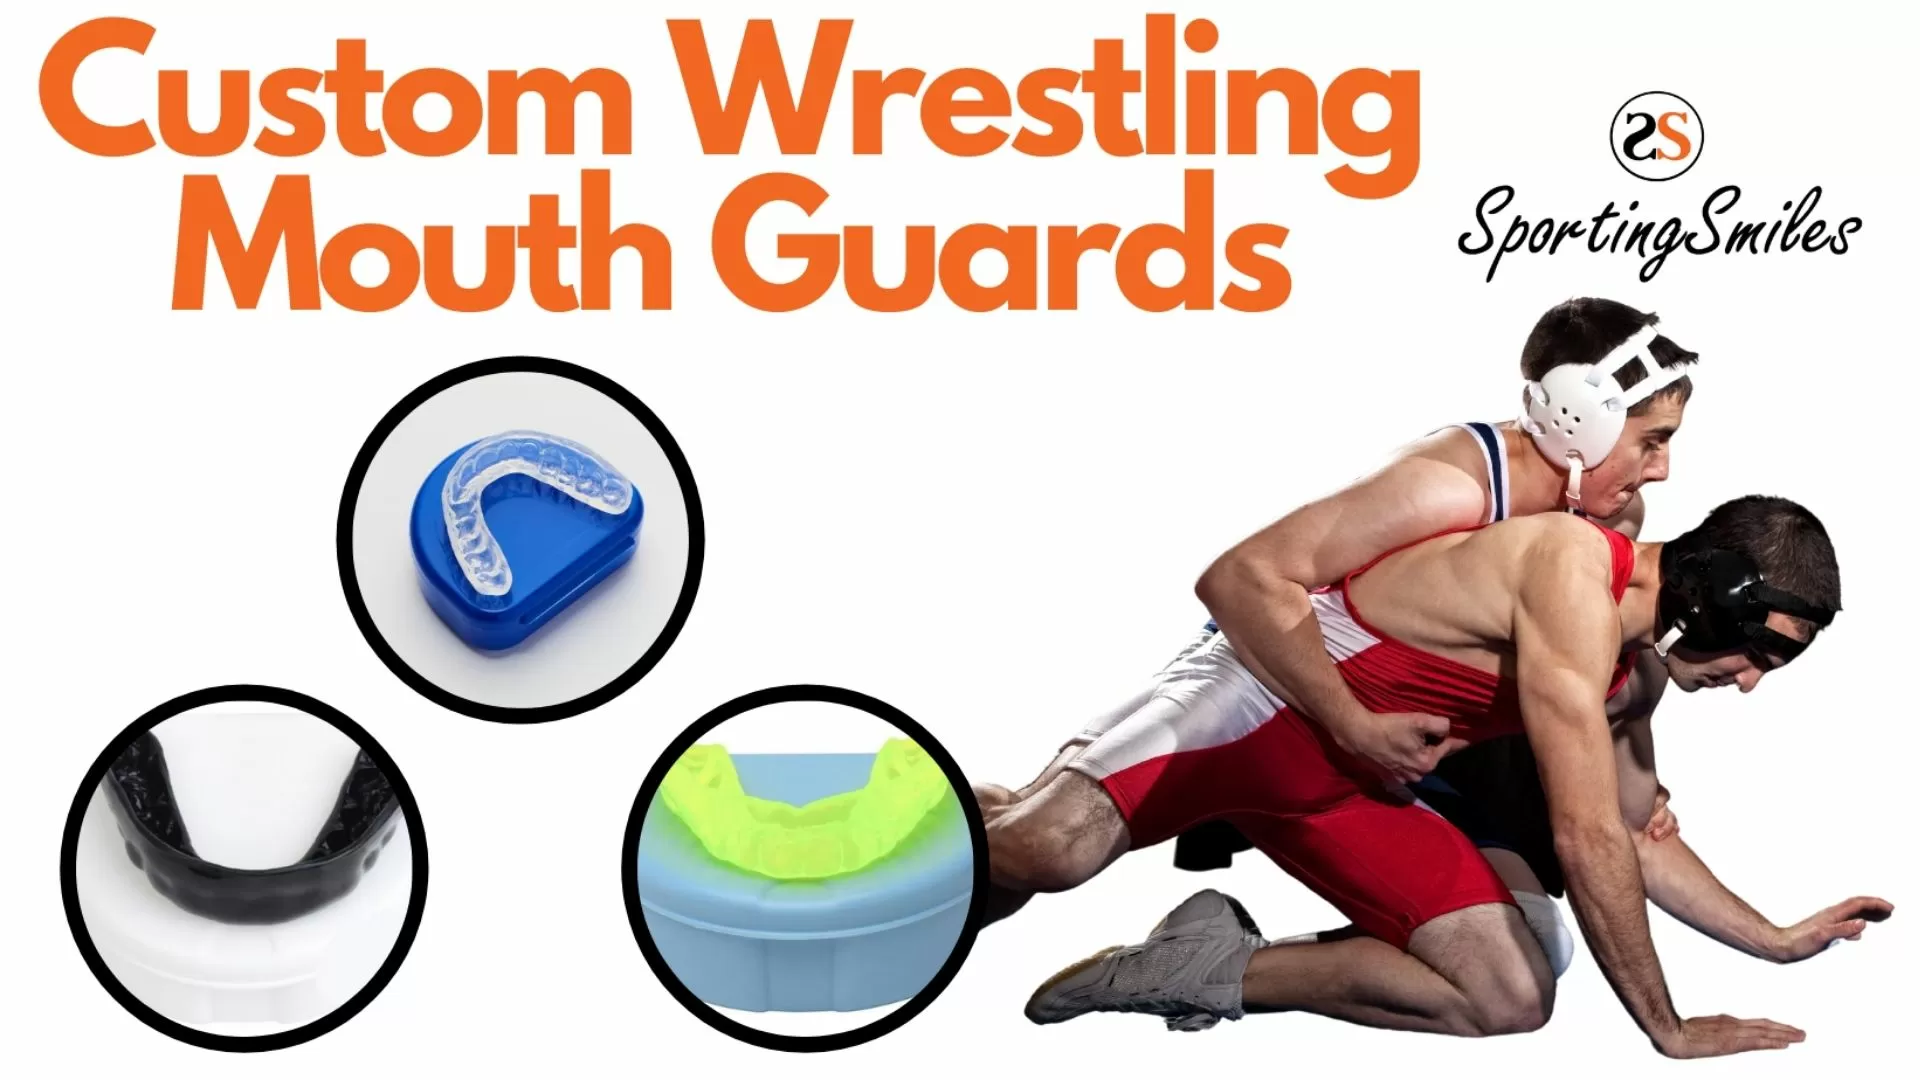 Custom Wrestling Mouth Guards